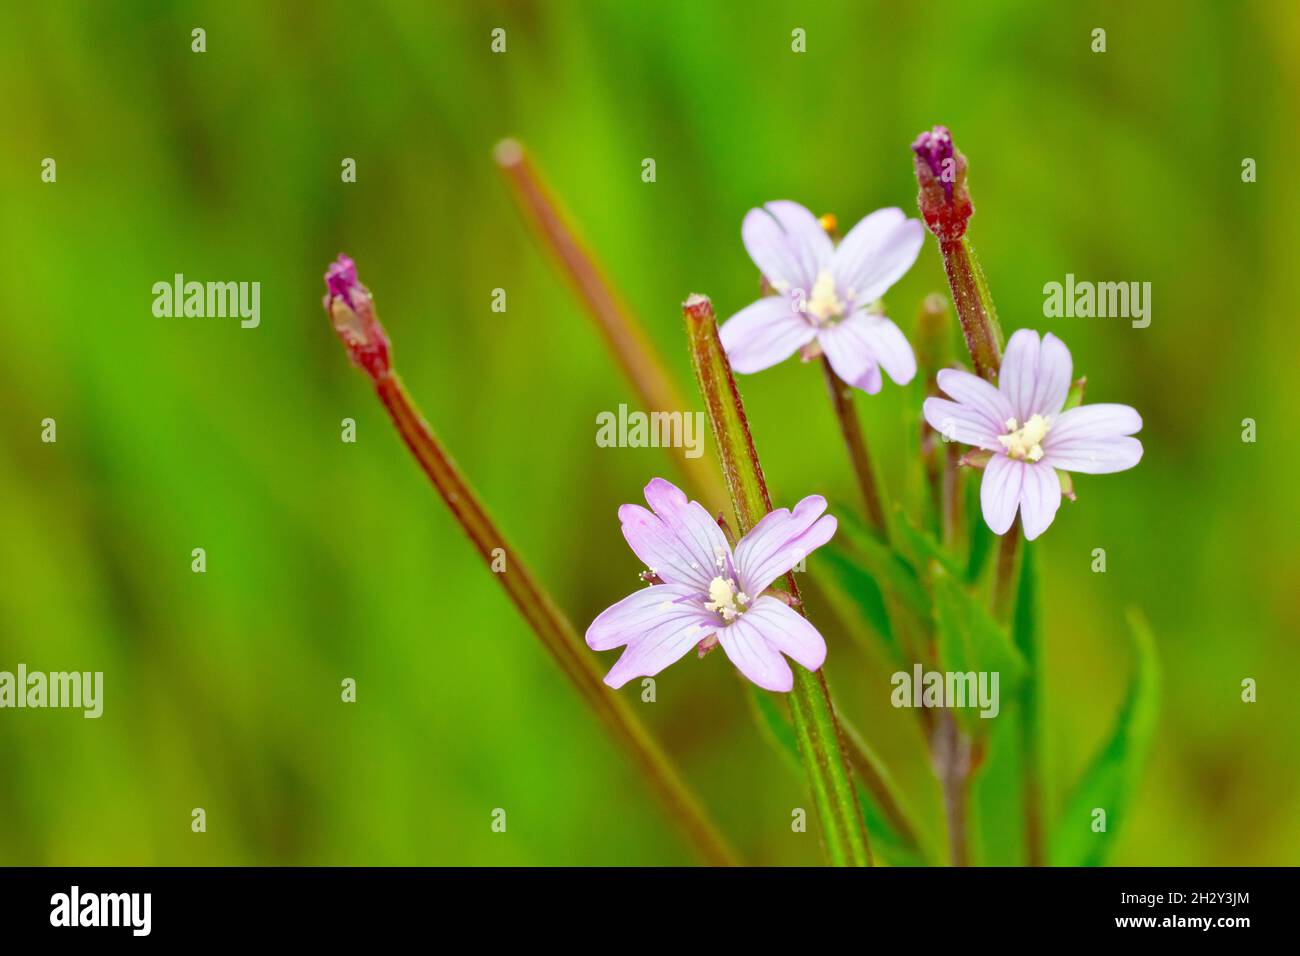 Either Broad-leaved (epilobium montanum) or Short-fruited (epilobium obscurum) Willowherb, close up of the small pink flowers. Stock Photo